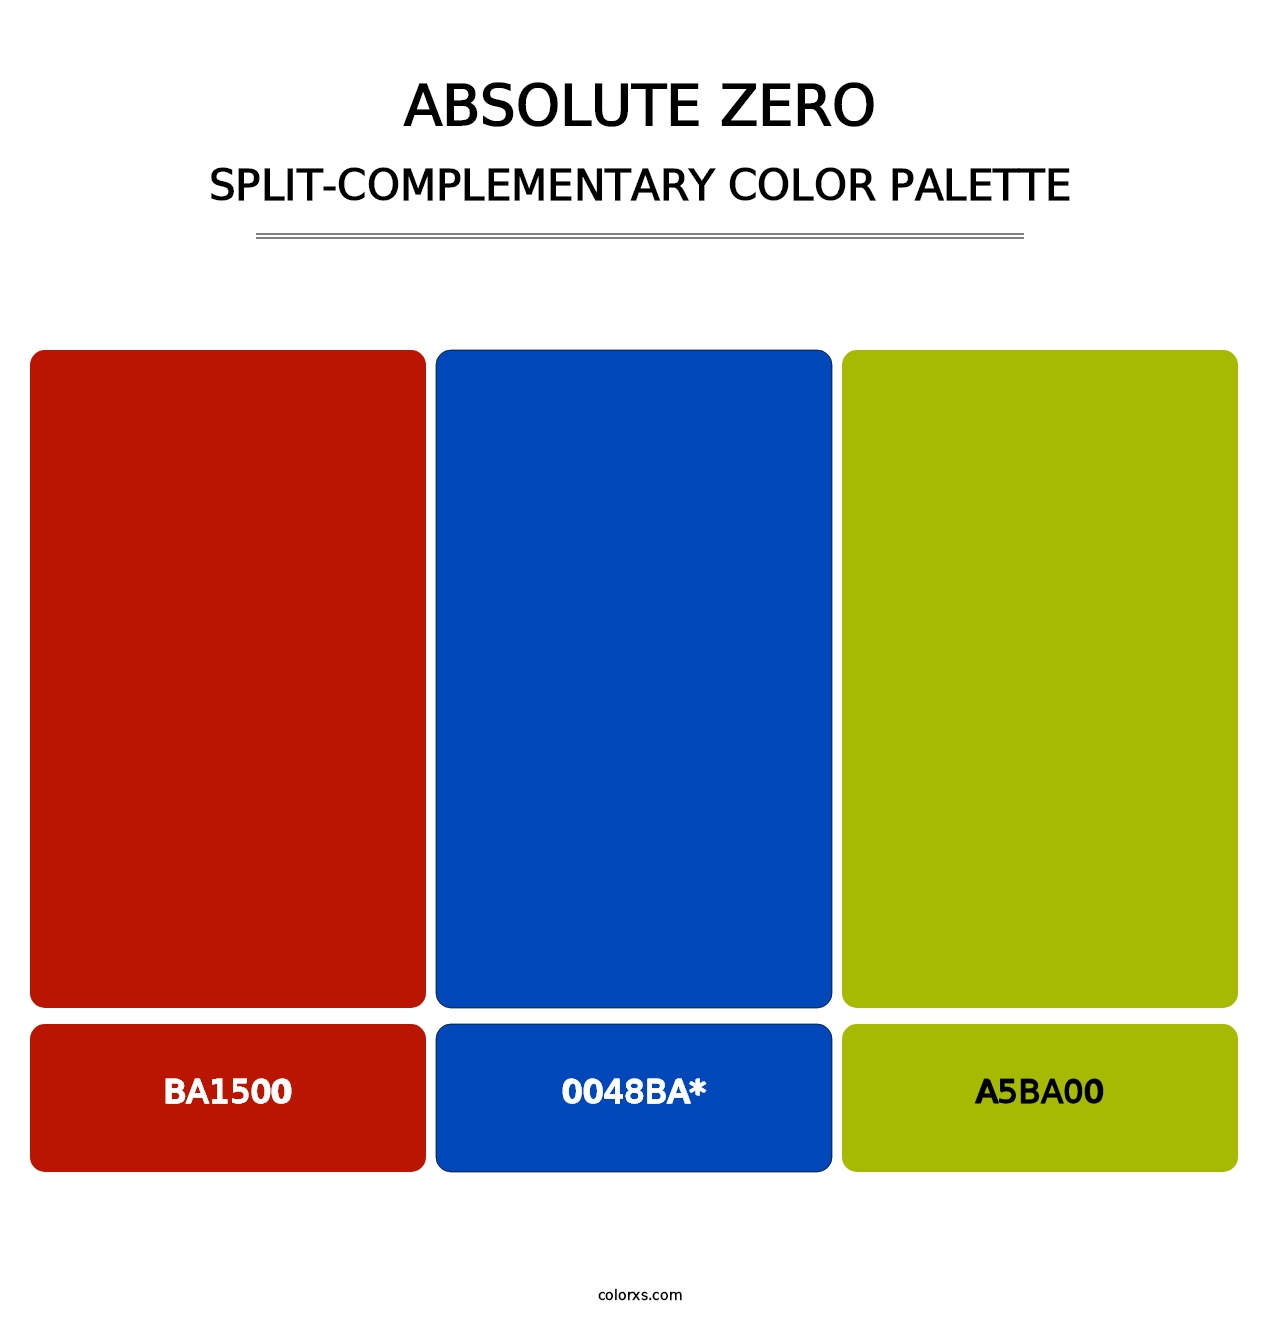 Absolute Zero - Split-Complementary Color Palette